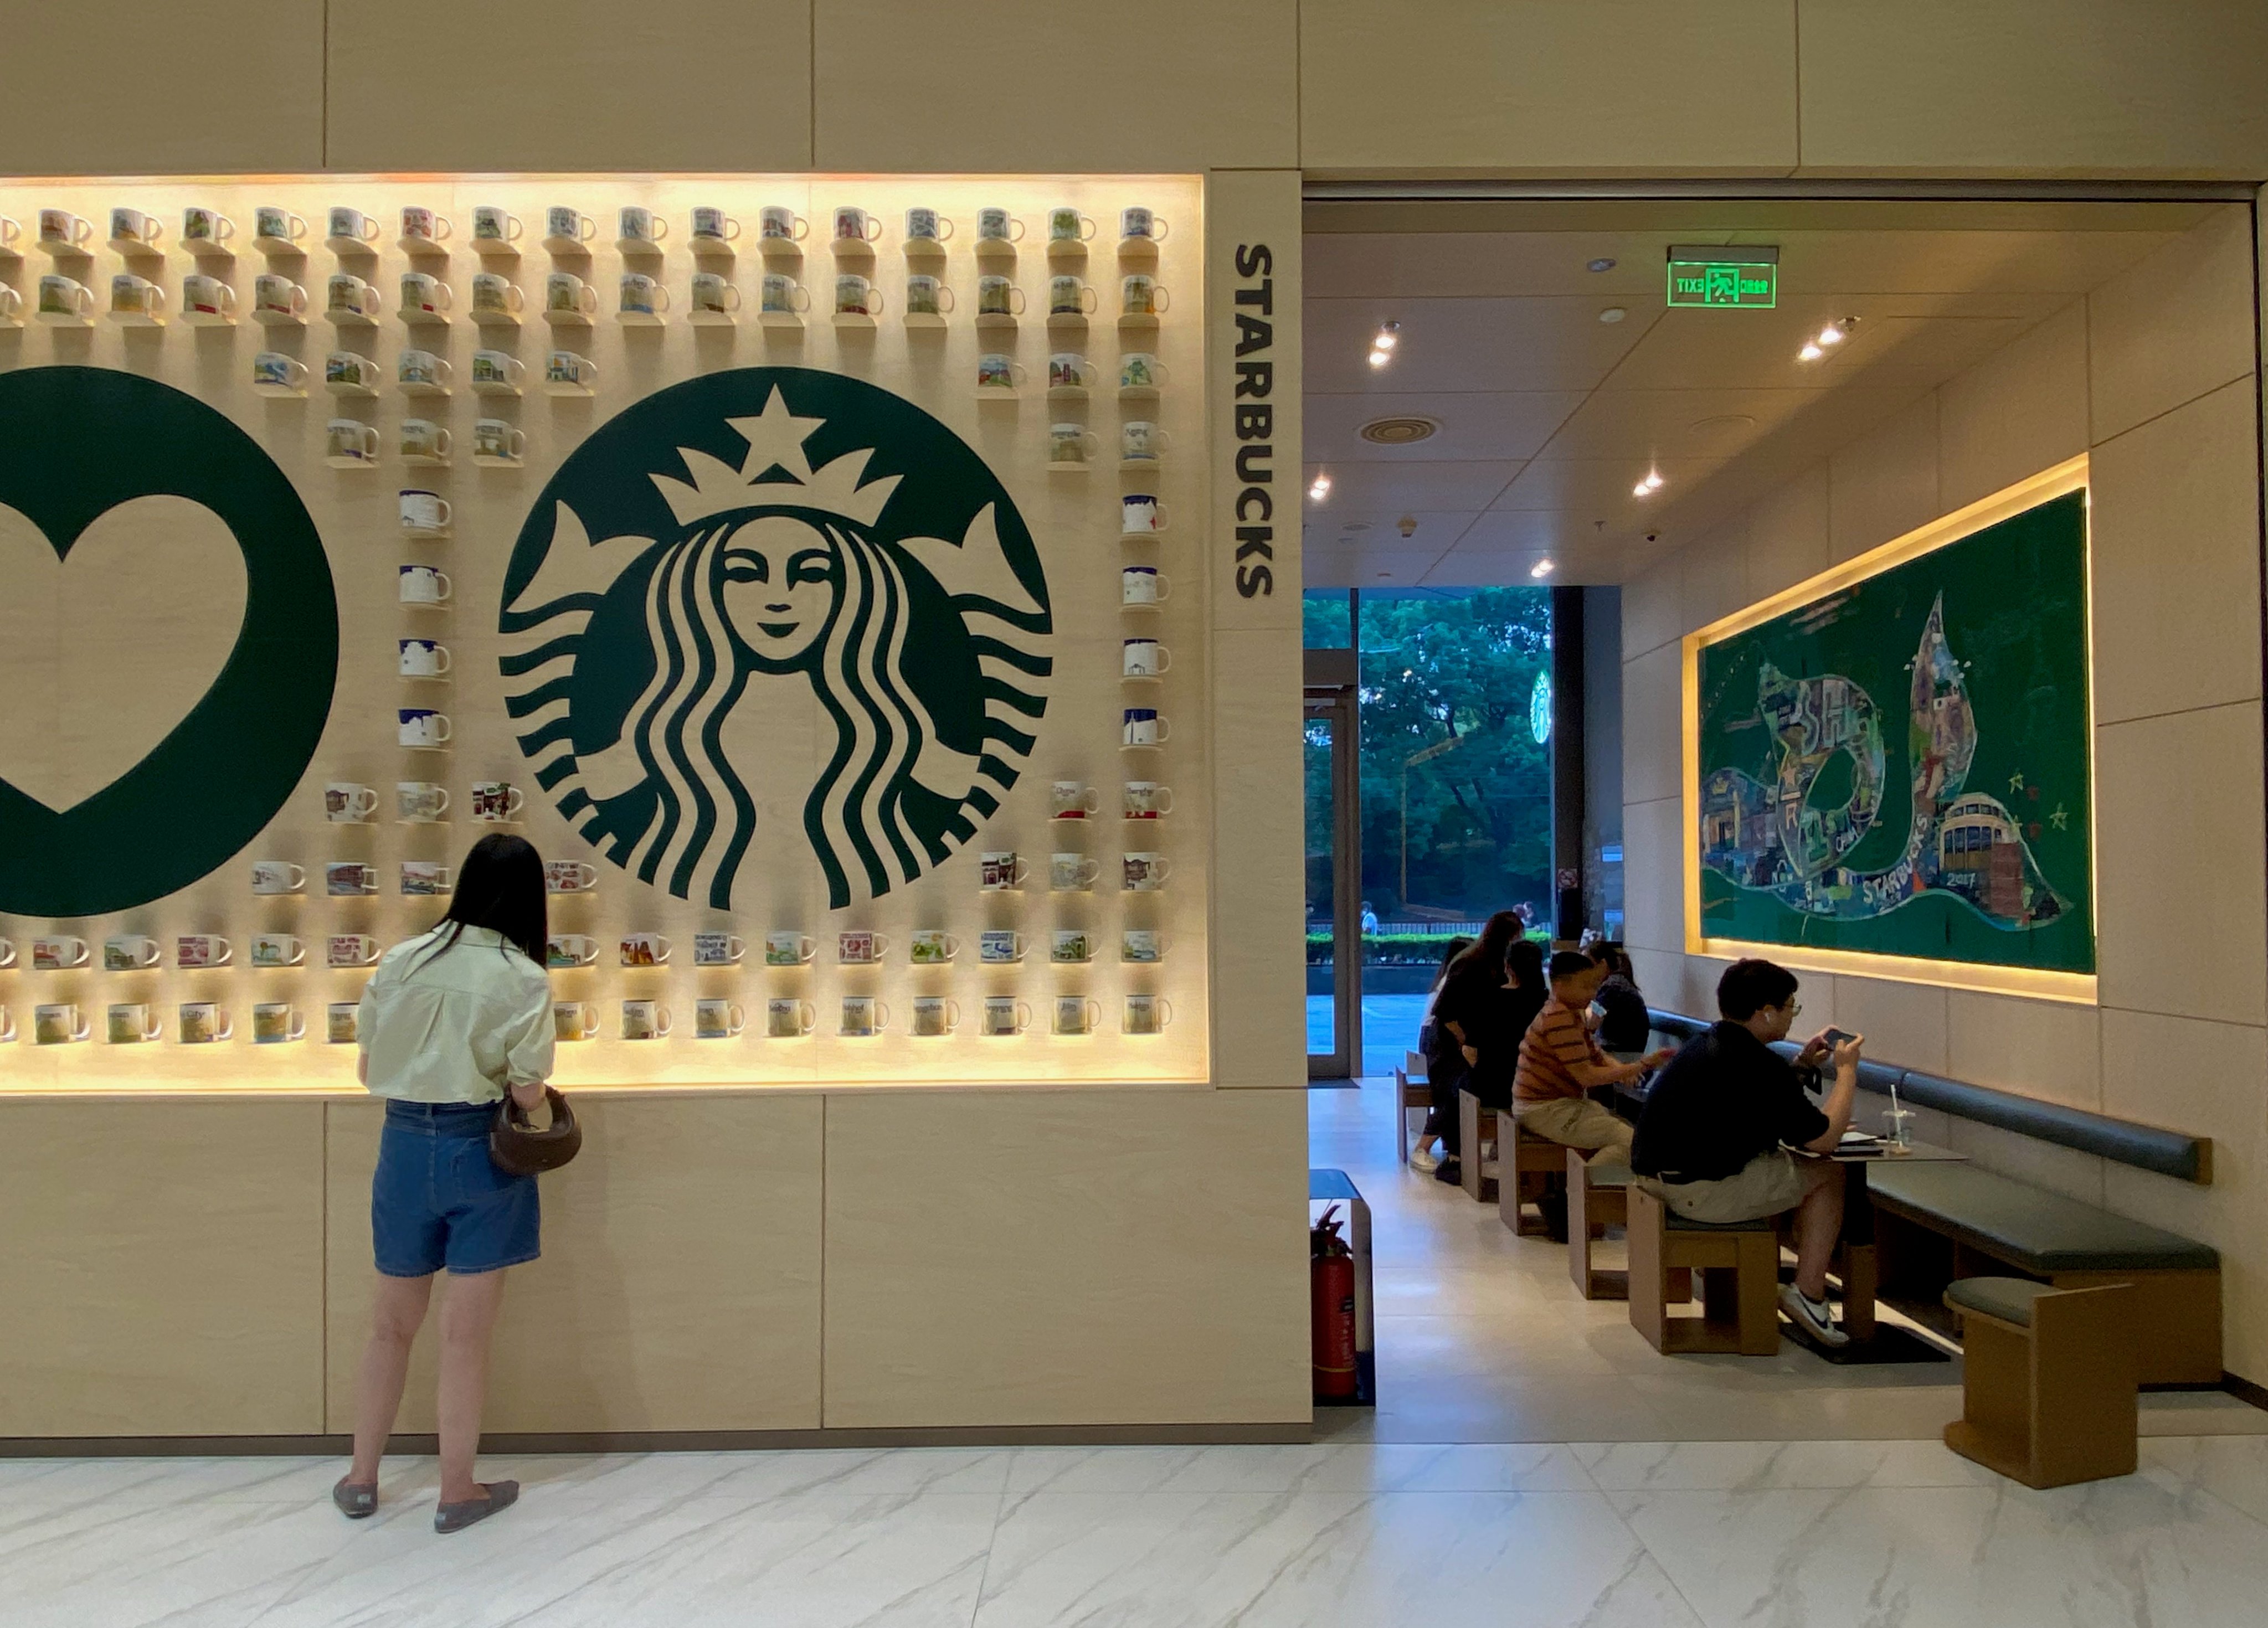 US coffee giant Starbucks opened its 6,000th mainland China store at Shanghai Lippo Plaza just before the Golden Week national holiday on October 1, 2022. Photo: SCMP/ Yaling Jiang